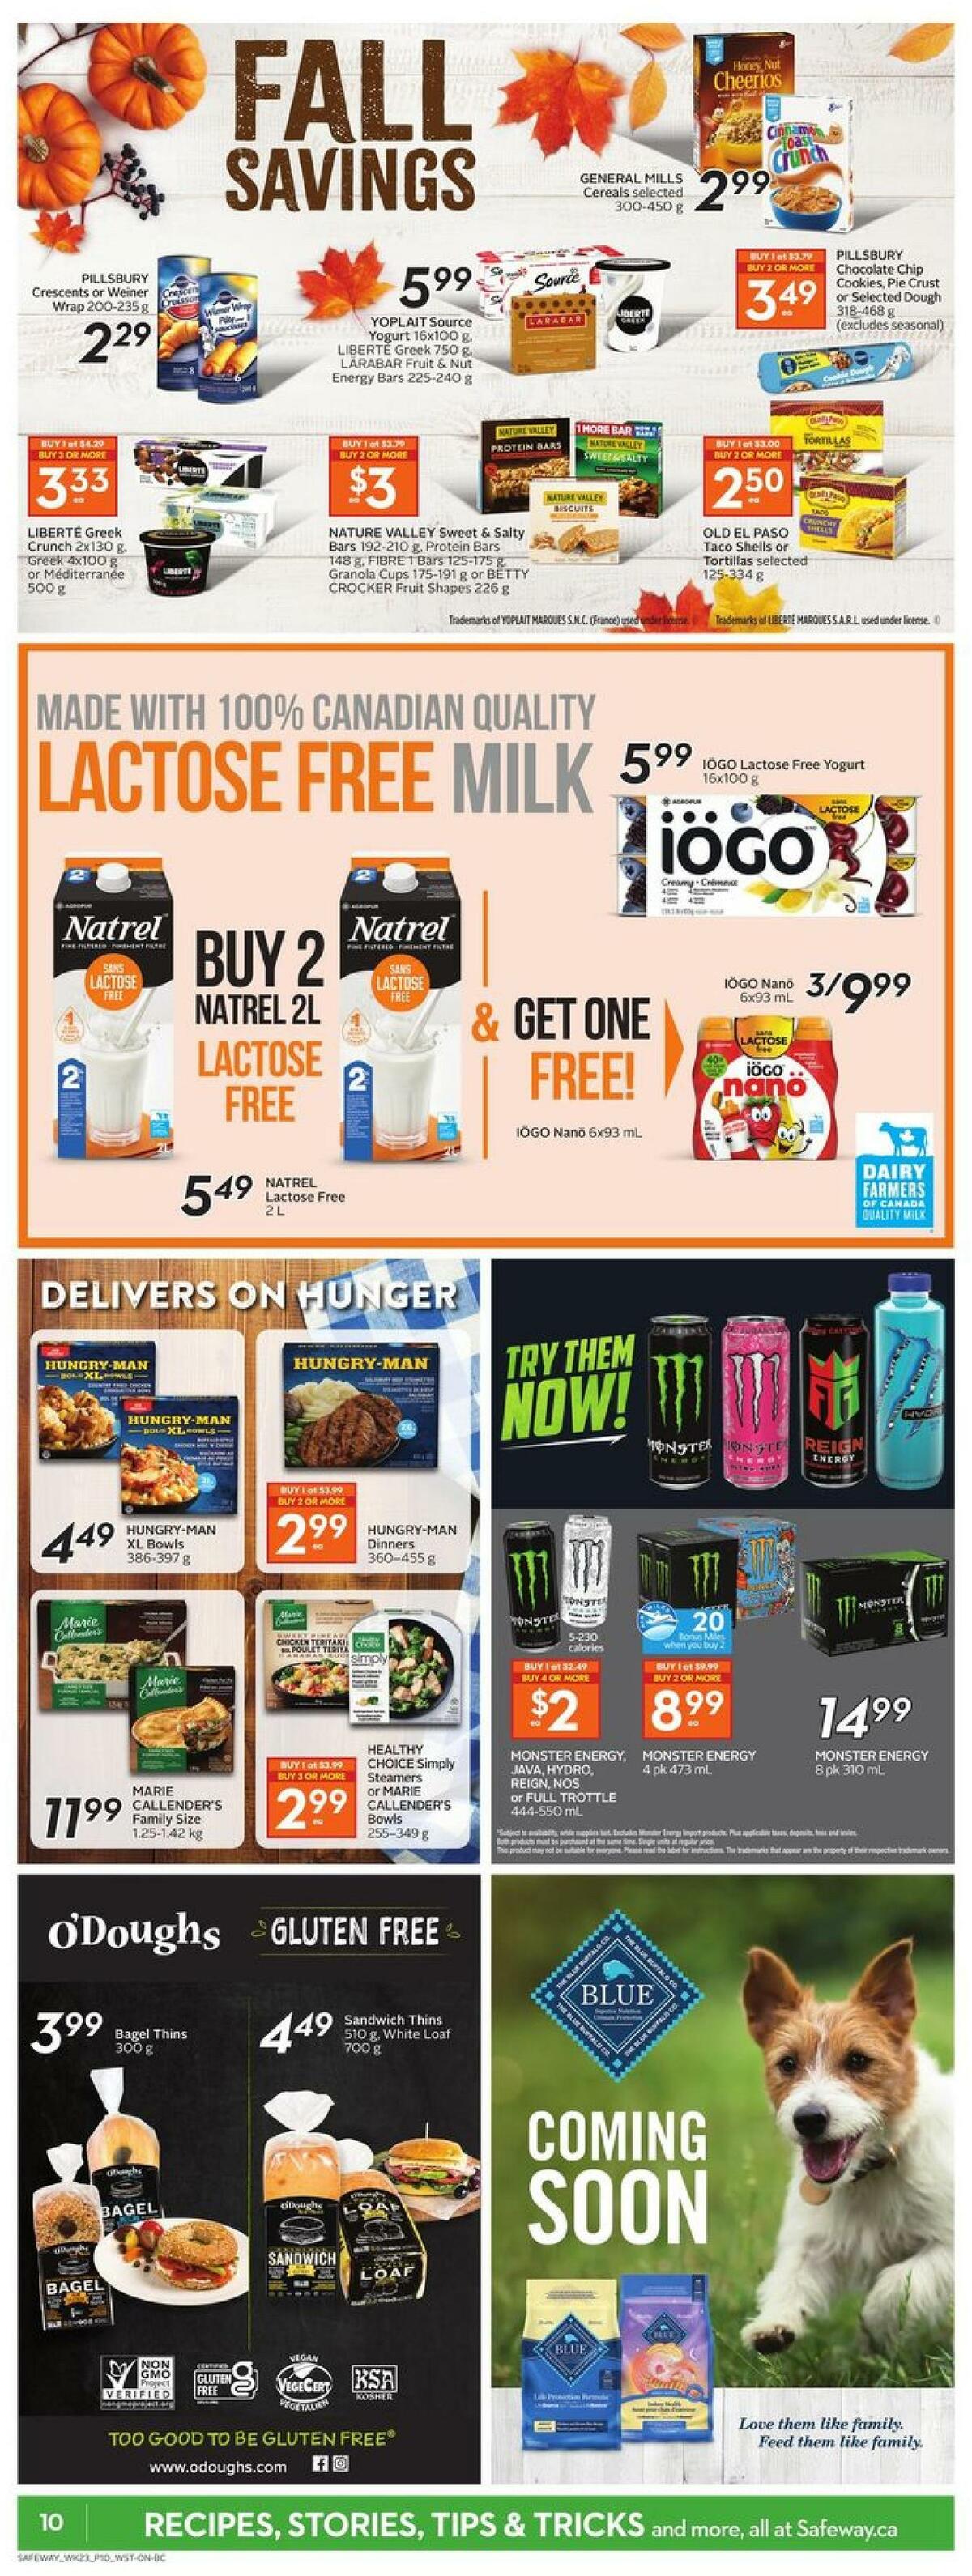 Safeway Flyer from October 1